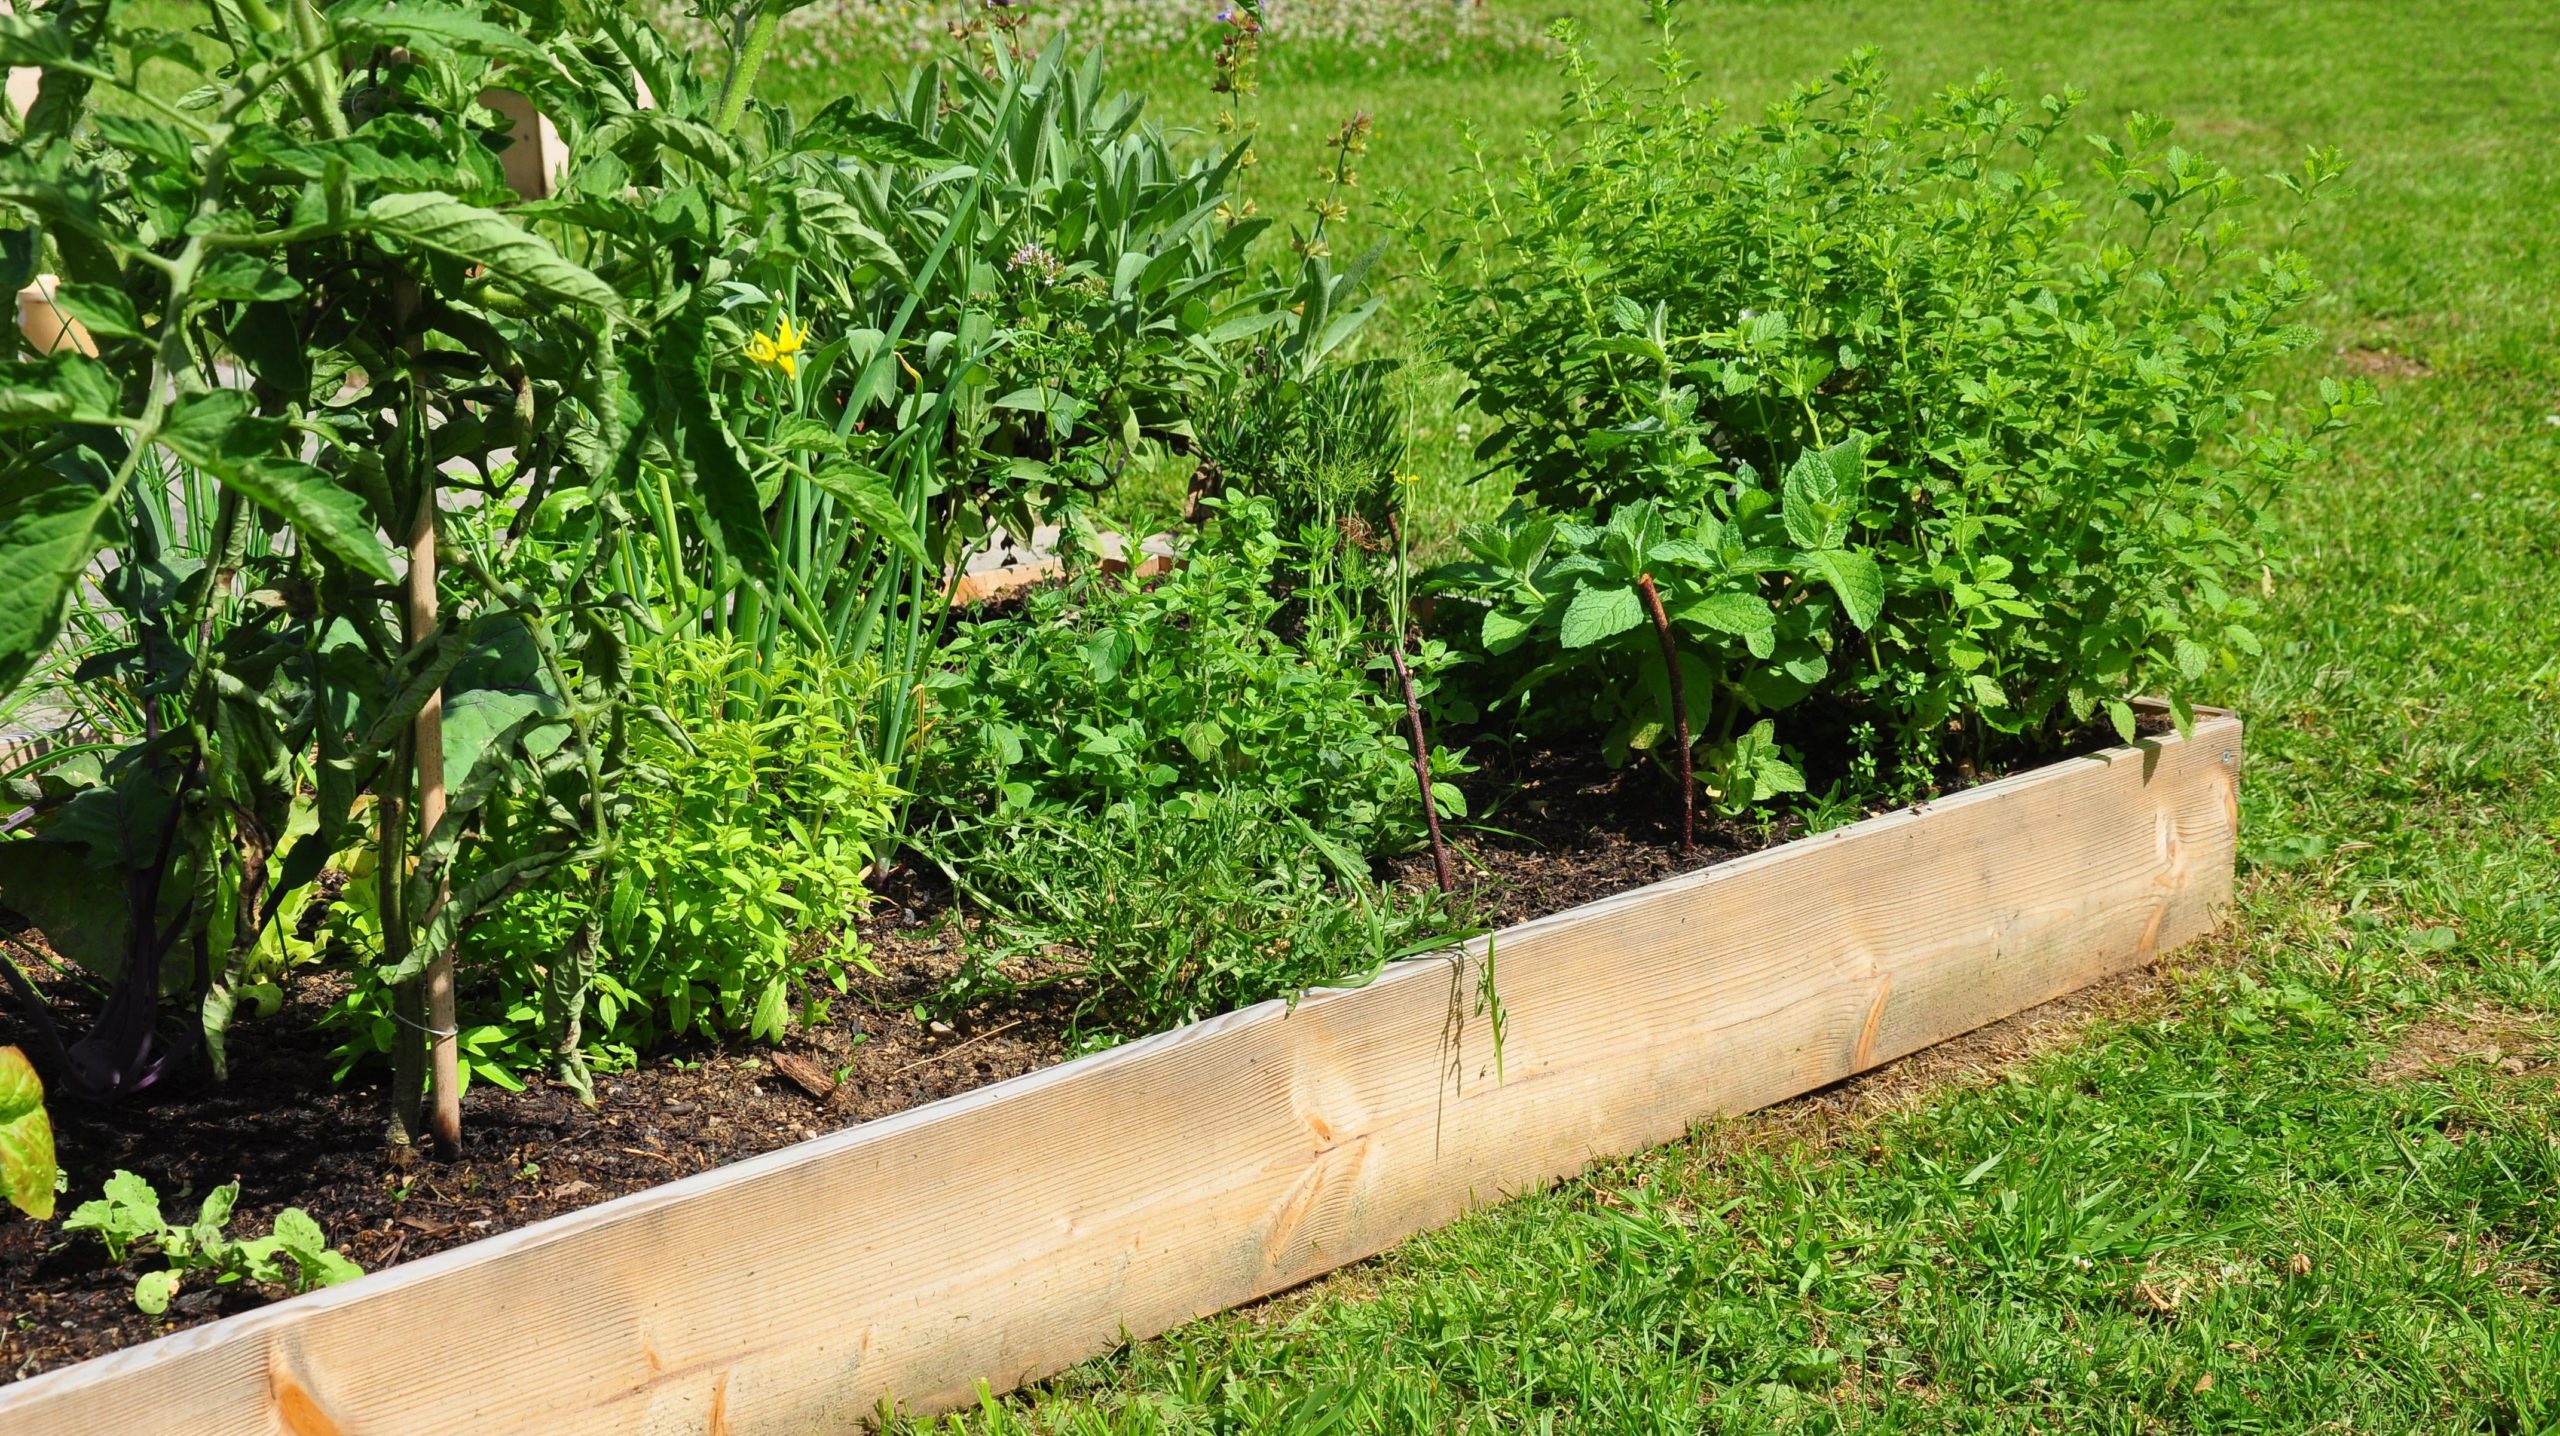 Why Raised Garden Beds Aren’t All They’re Cracked Up to Be